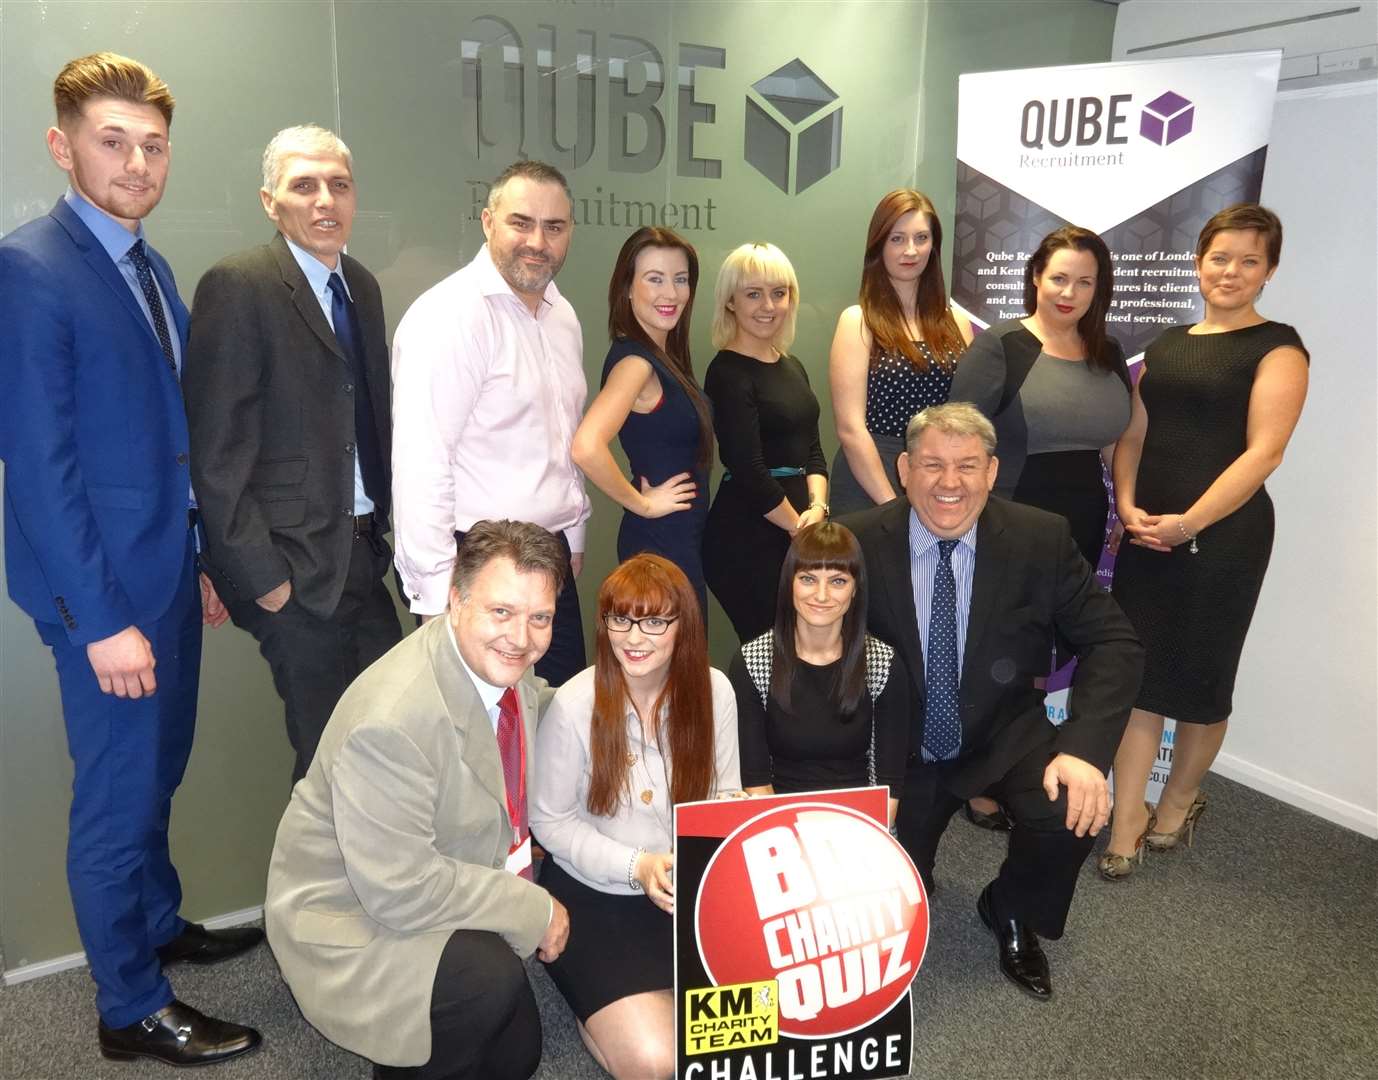 Qube Recruitment are key partners of the KM Big Charity Quiz Grand Final which will provide a welcome boost to child road safety services.